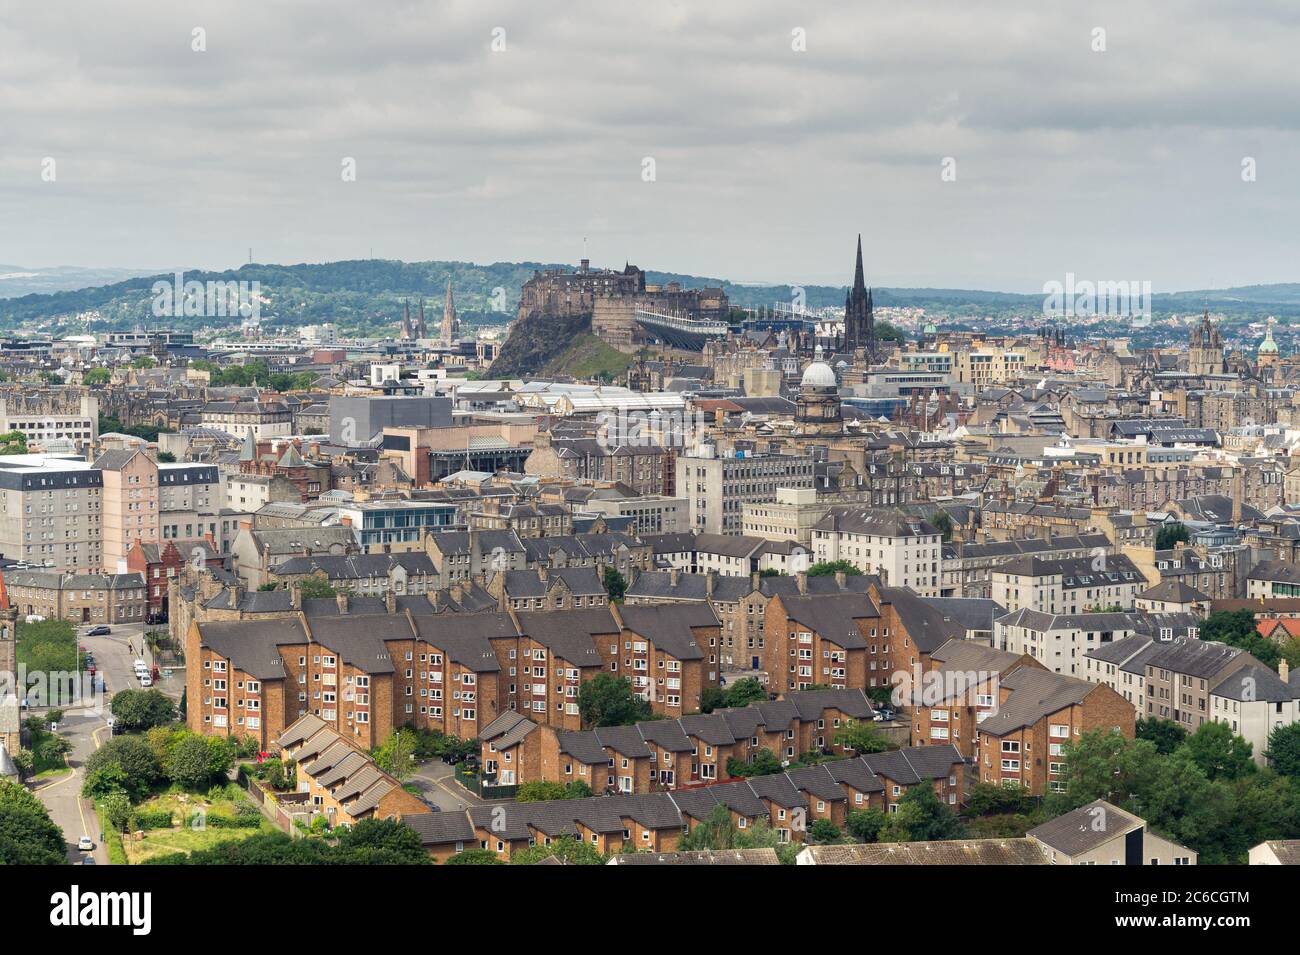 Spectacular view of Edinburgh from Holyrood Park on a cloudy summer day Stock Photo